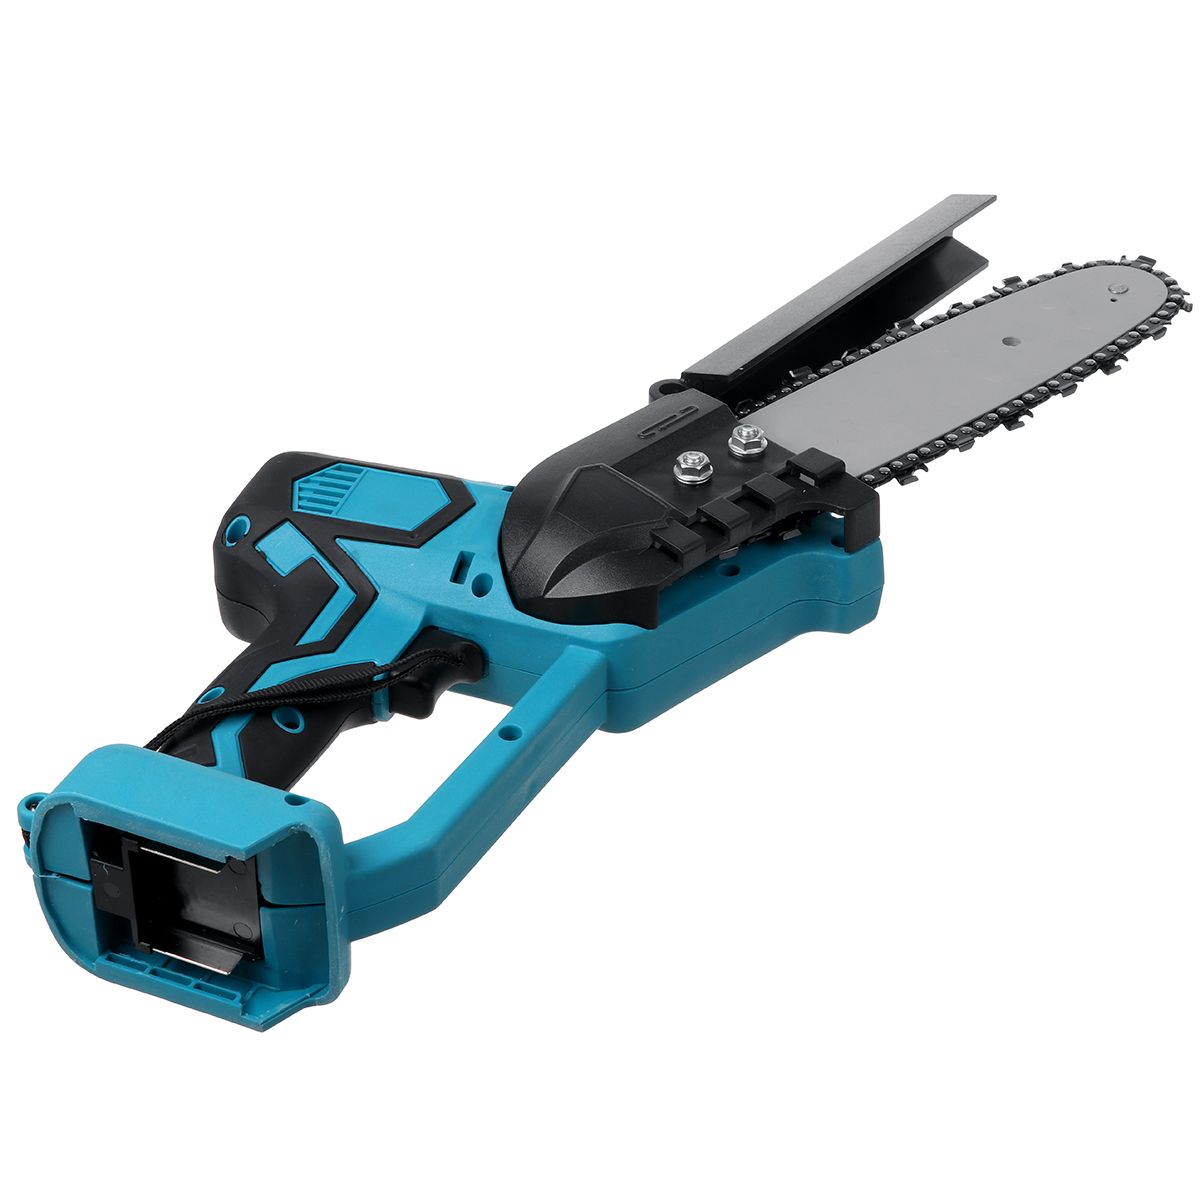 Portable-Cordless-Electric-Chain-Saw-8-Inch-Chainsaw-Woodworking-Power-Tool-For-Makita-18V-Battery-1721197